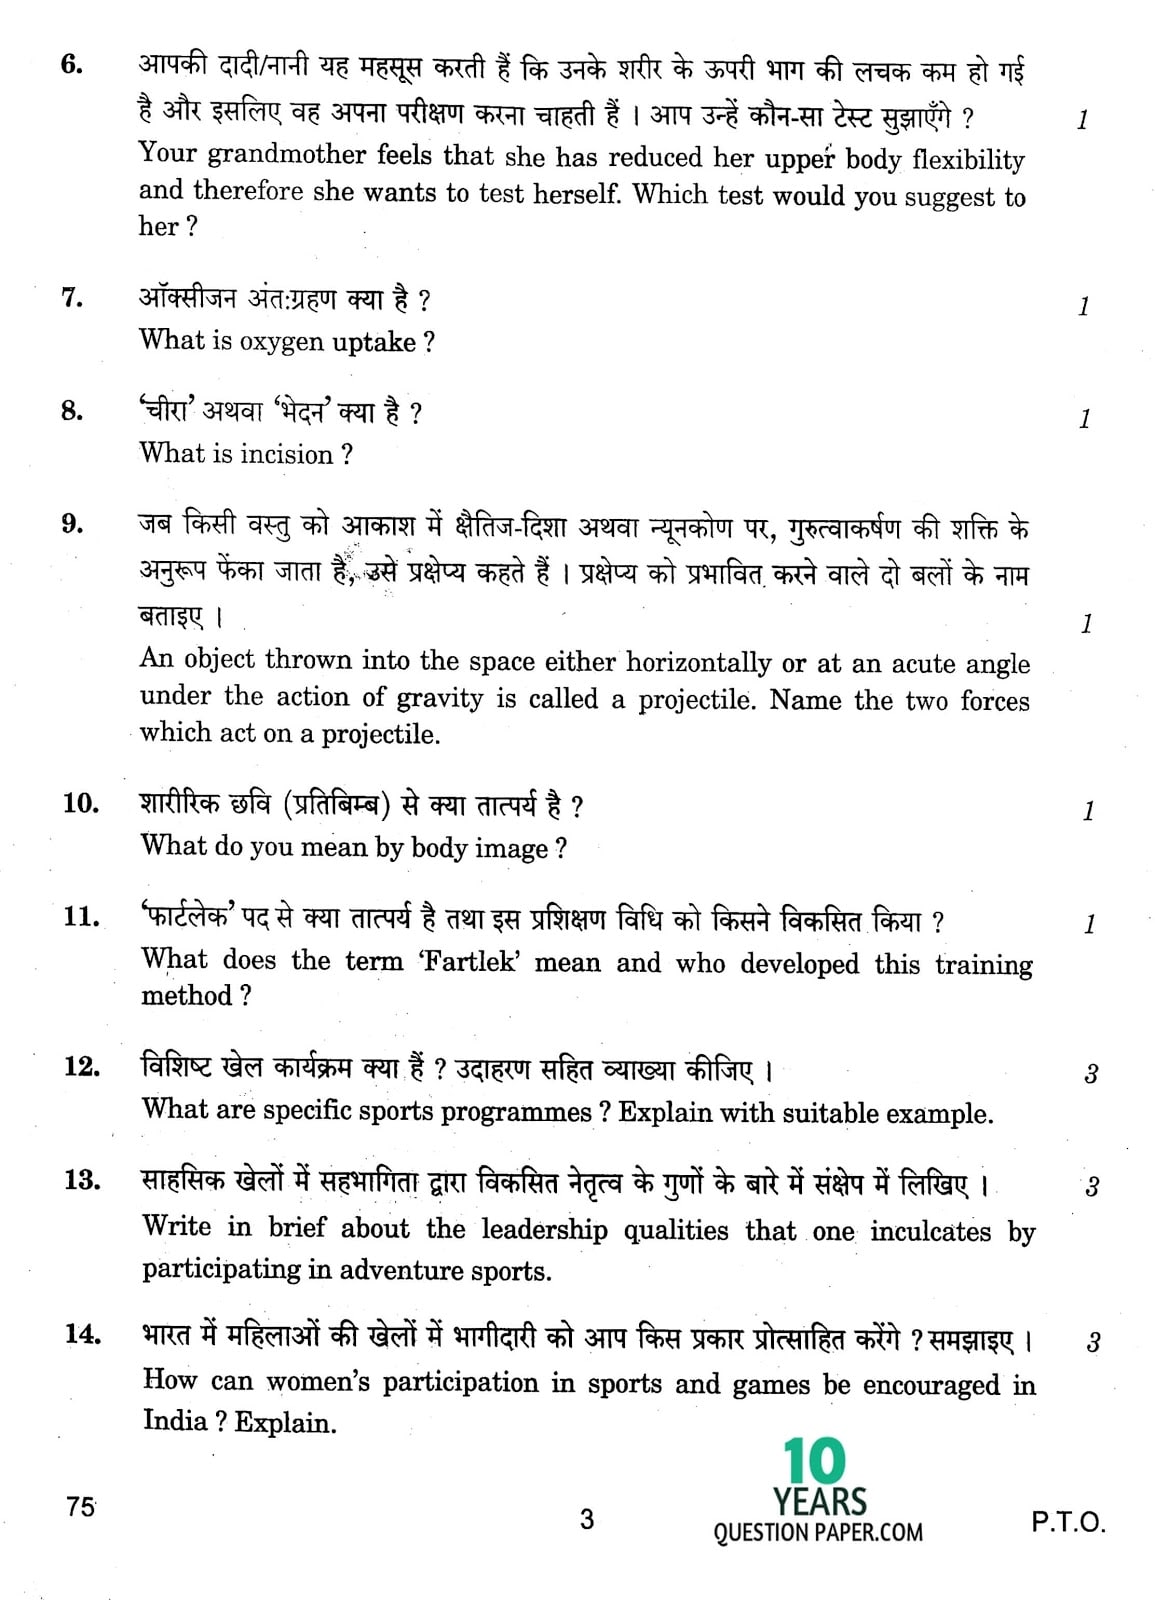 CBSE Class 12 Physical Education 2017 Question Paper